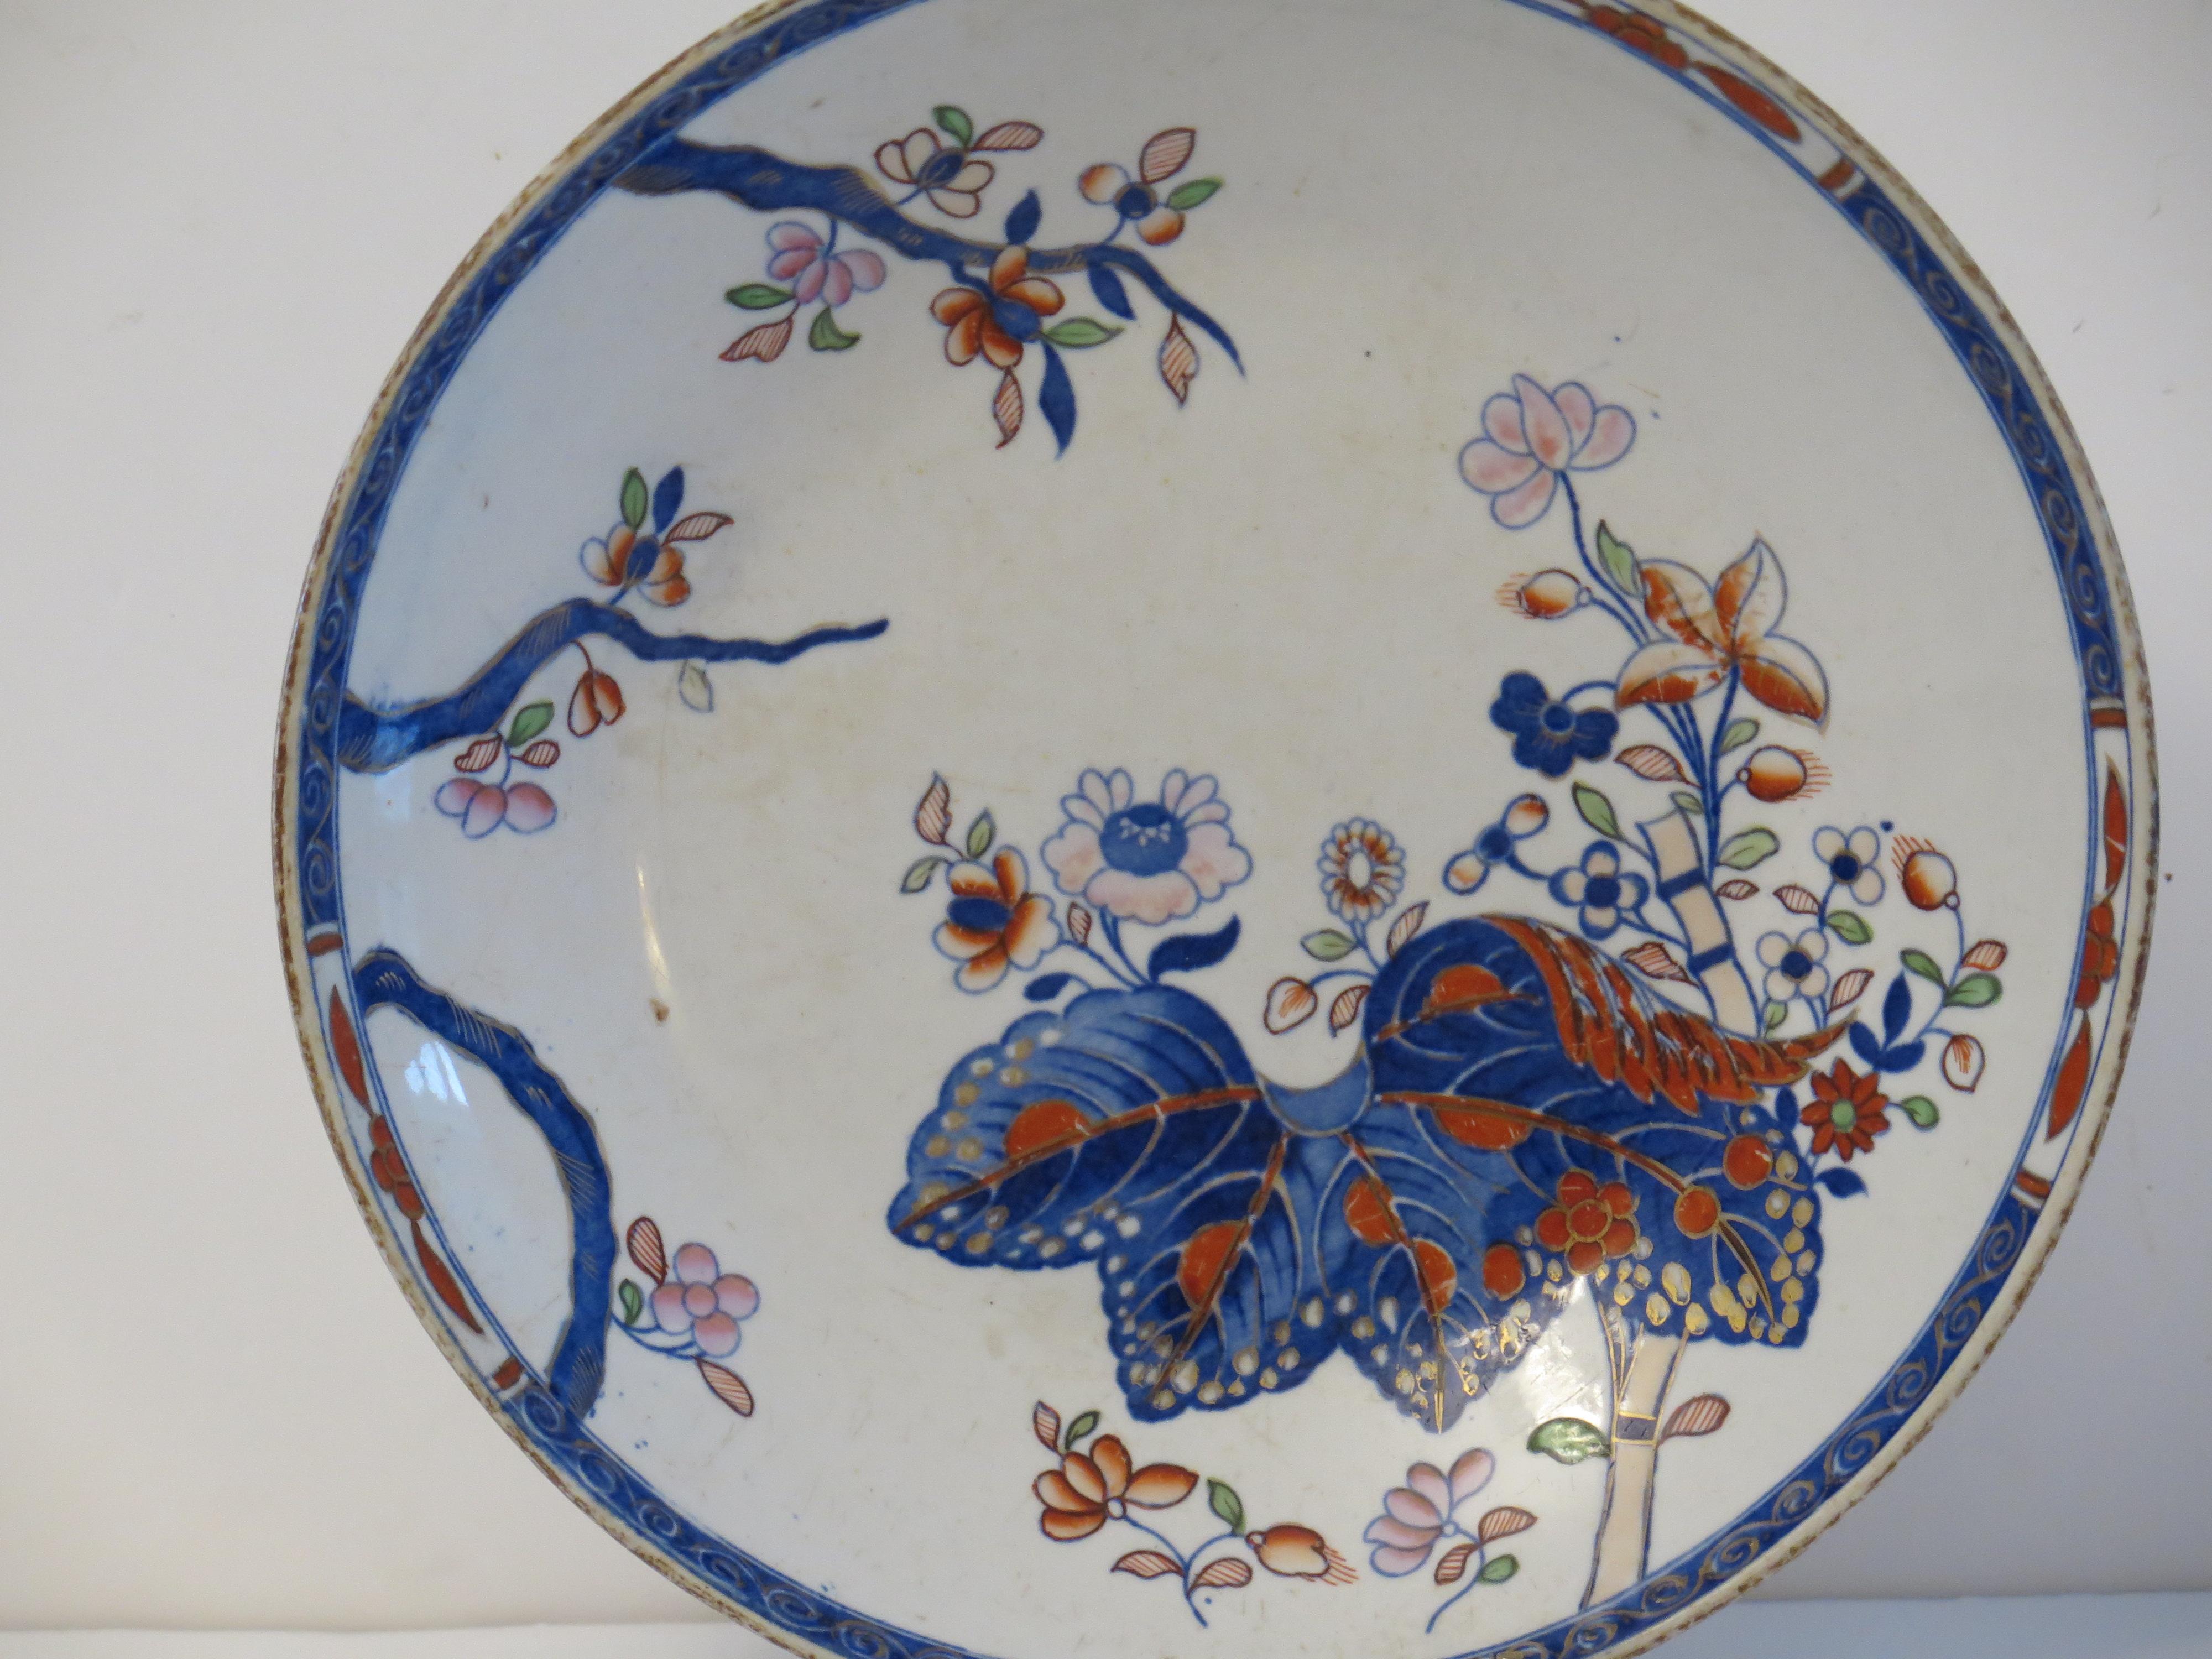 Chinoiserie Georgian Spode Stone China large Saucer Dish in Tobacco Leaf Pattern No. 2061